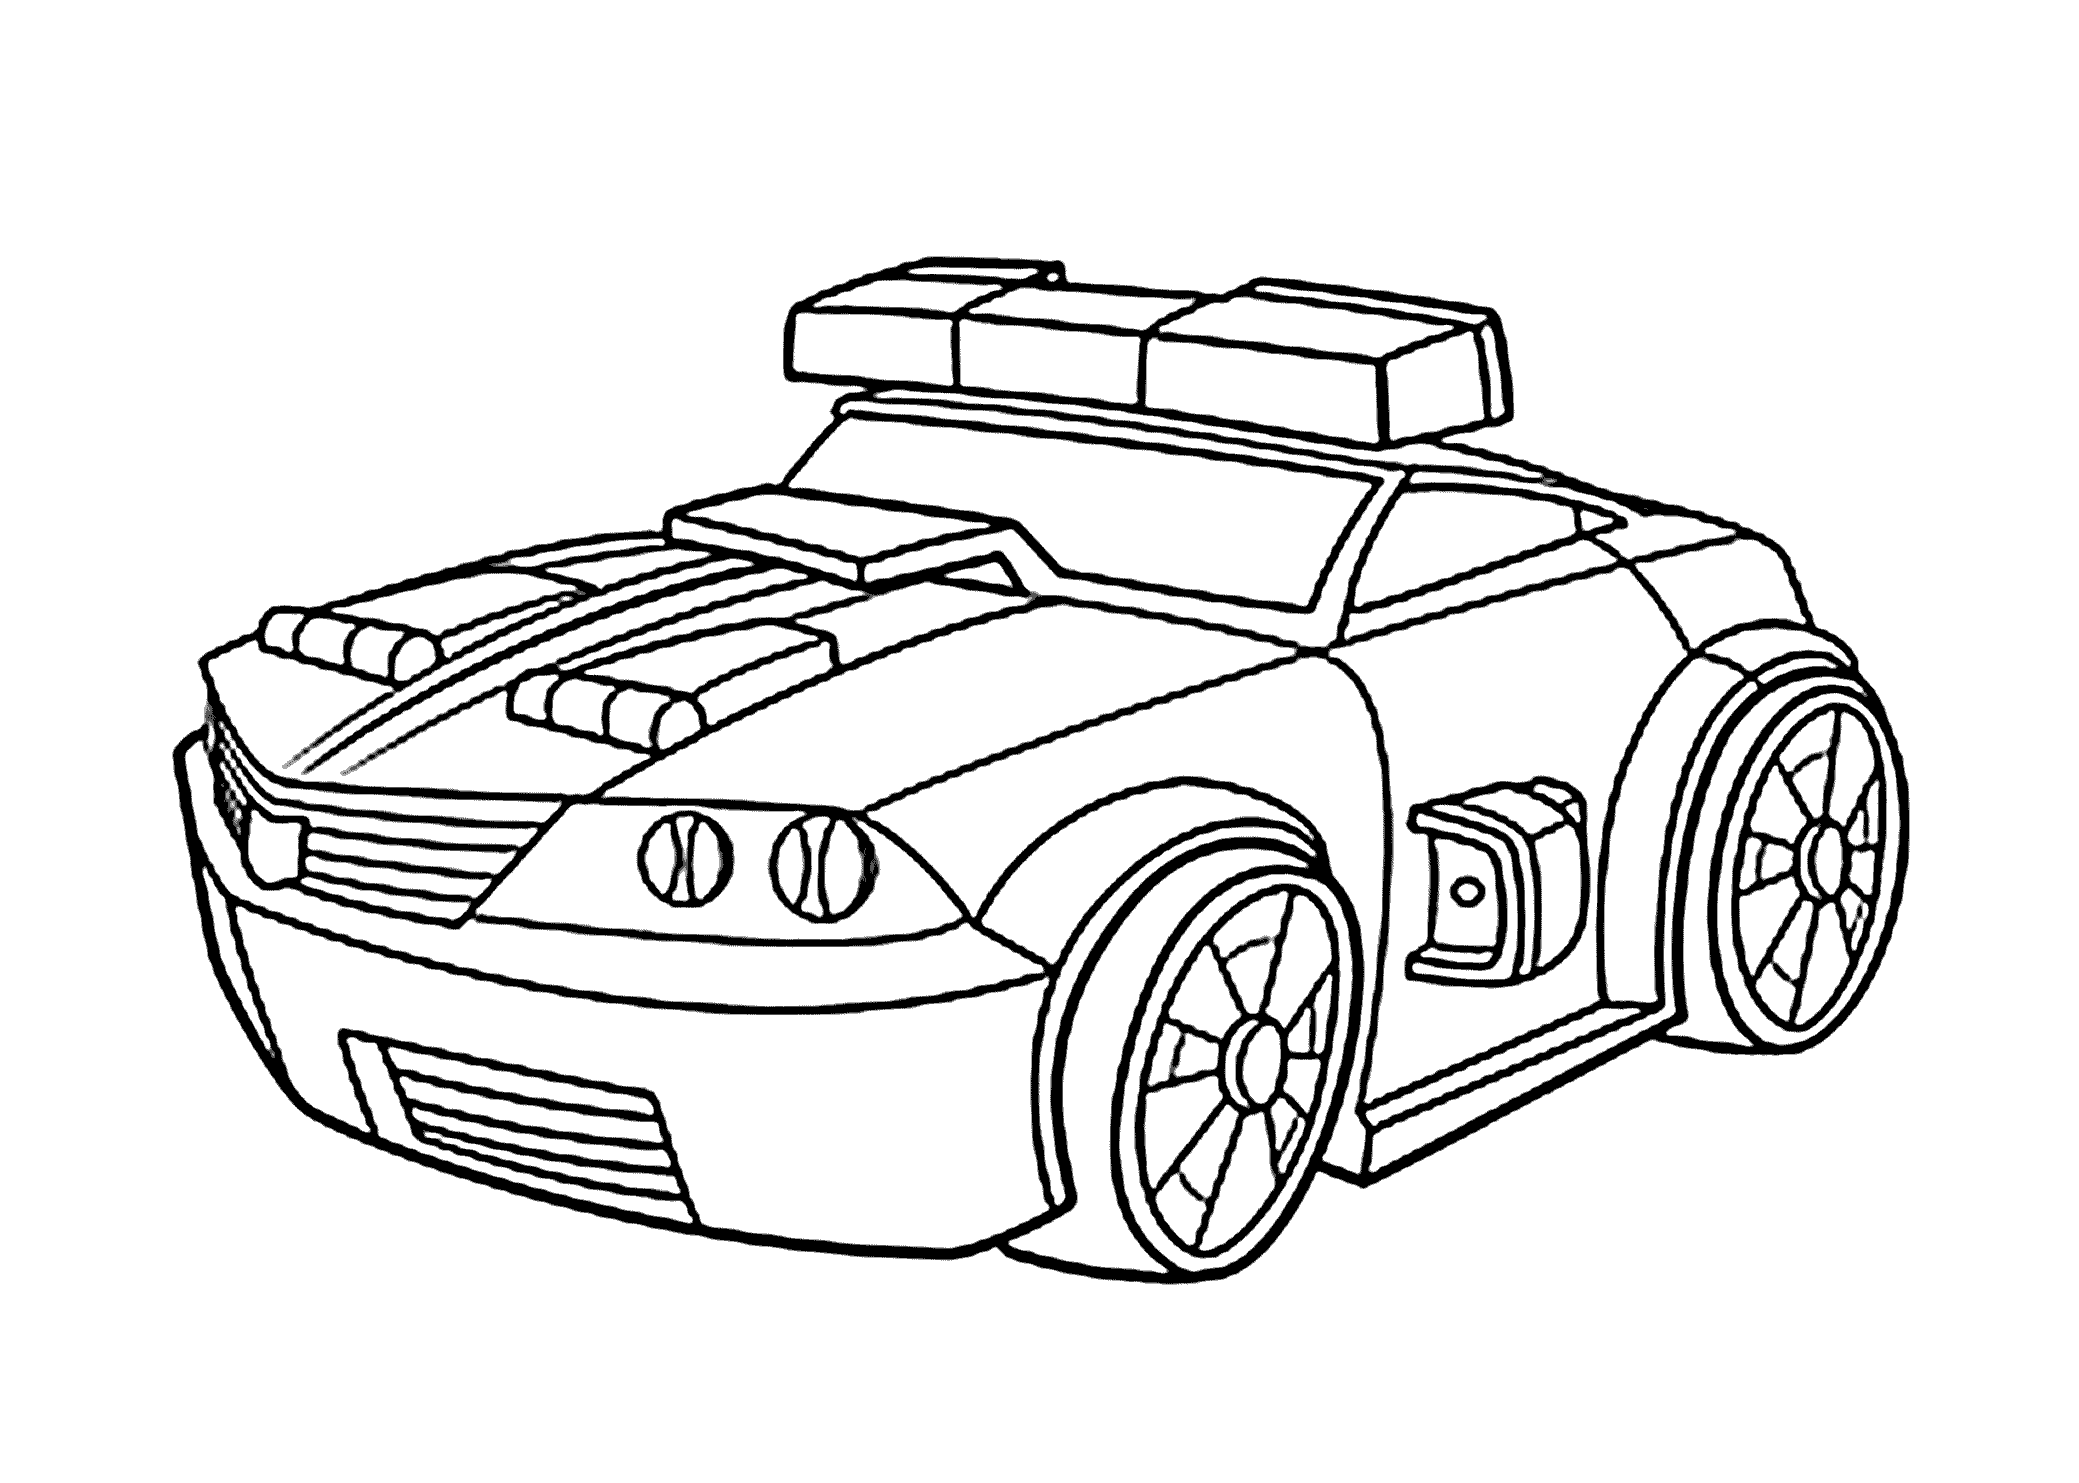 Rescue Bots Coloring Pages - Best Coloring Pages For Kids